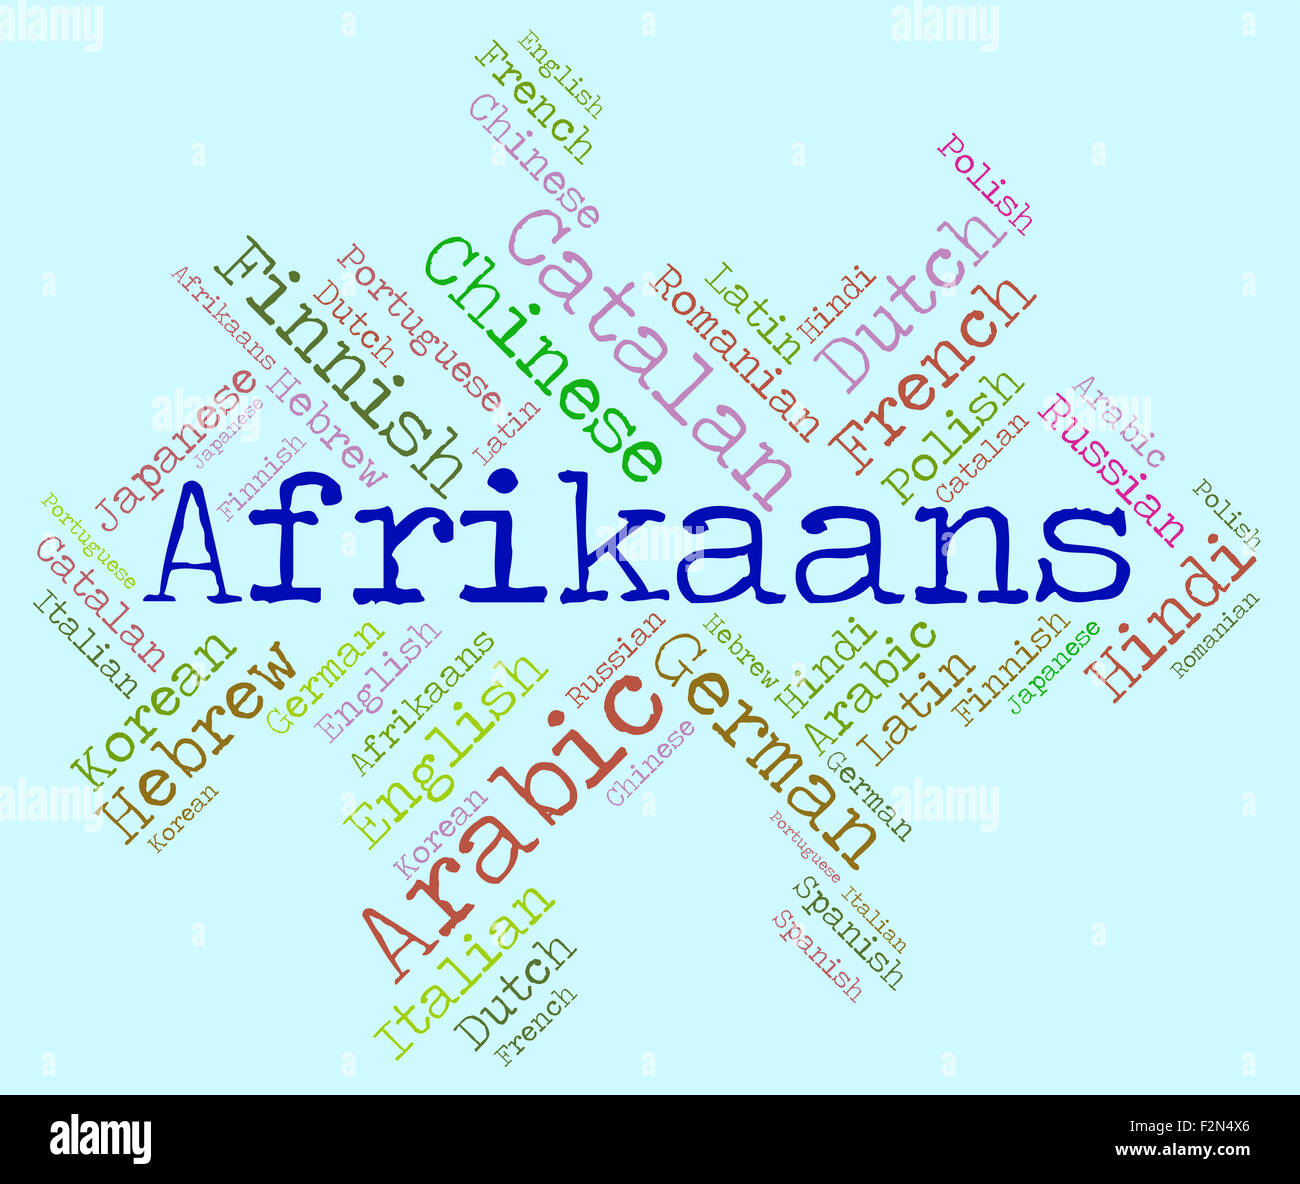 Afrikaans Language Representing South Africa And Lingo Stock Photo